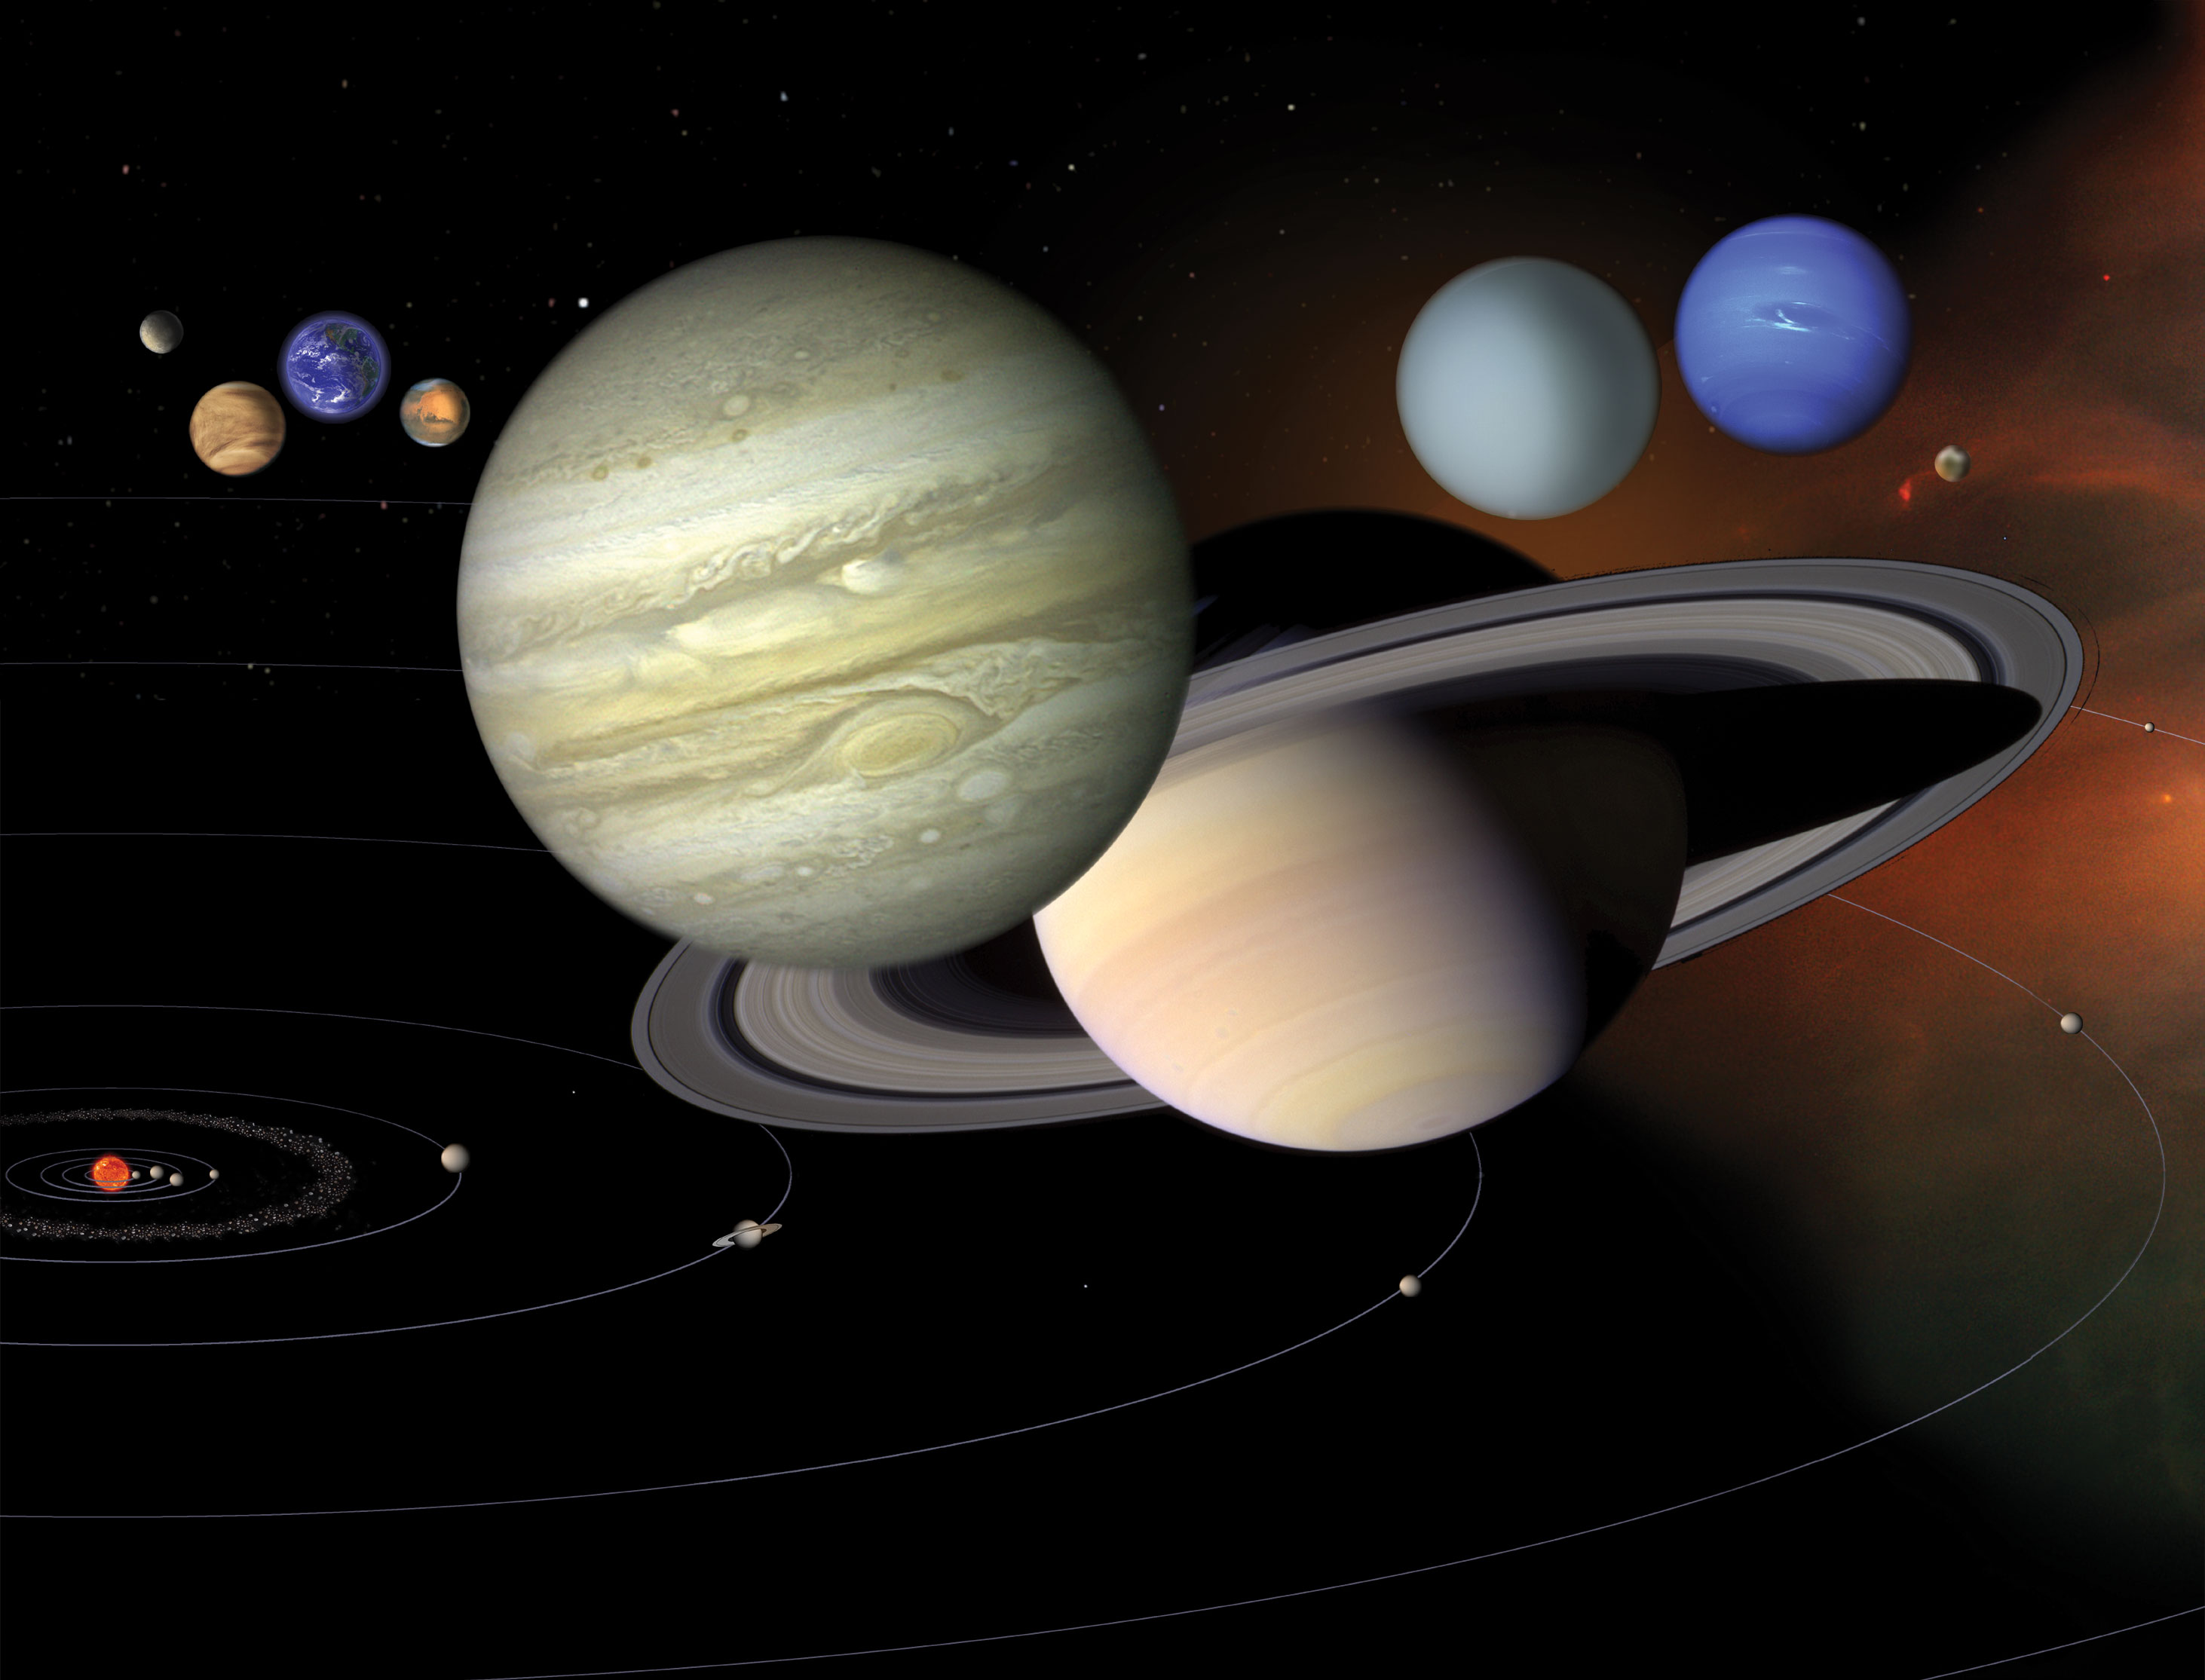 An illustration of orange and blue planets and other objects in our solar system shown not to scale, but to illustrate some of the details of each world.